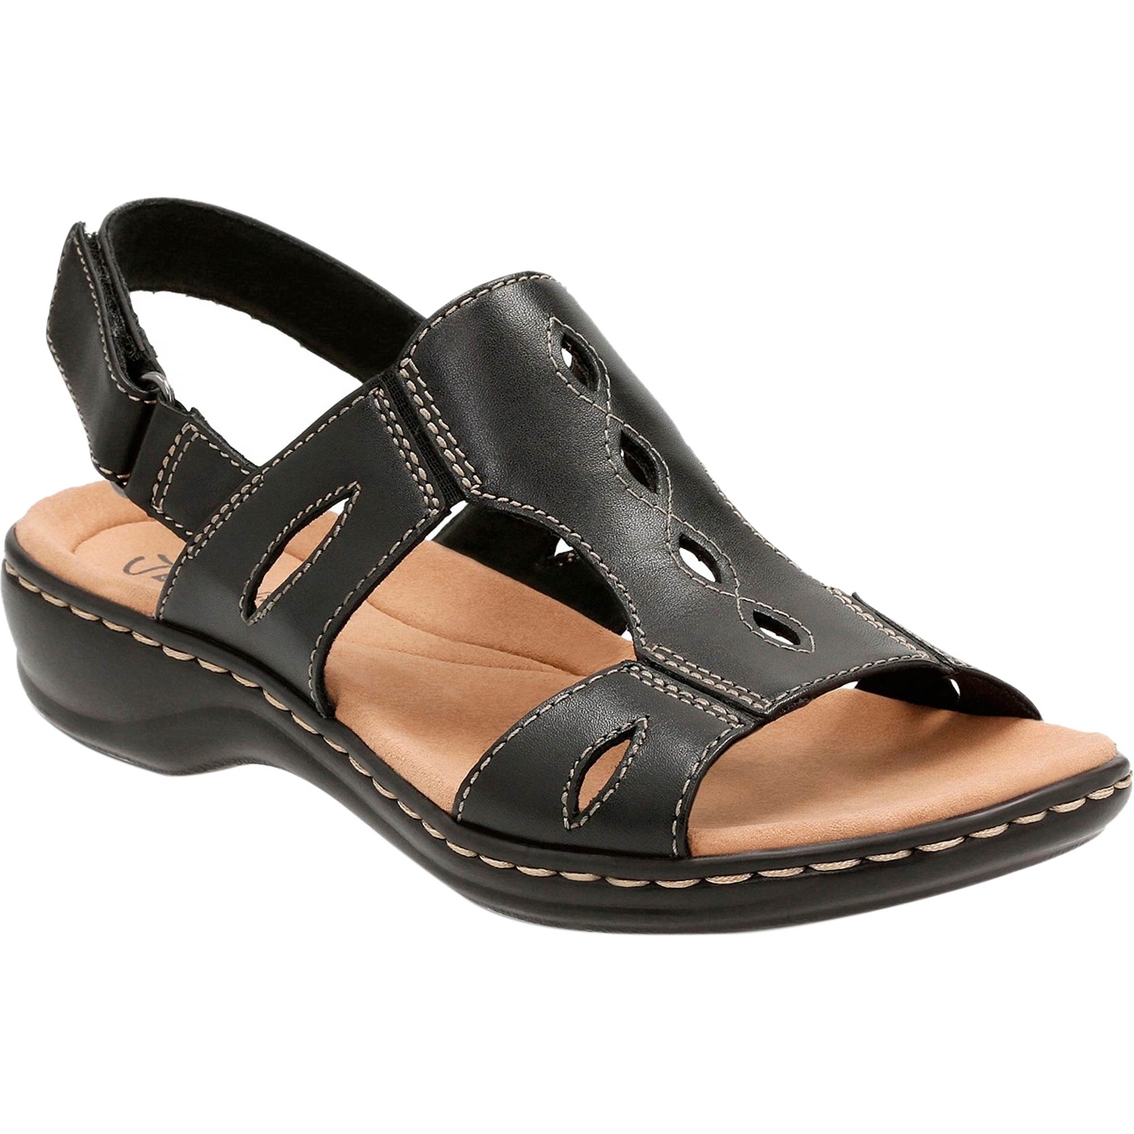 Clarks Leisa Lakelyn Sandals | Flats | Shoes | Shop The Exchange